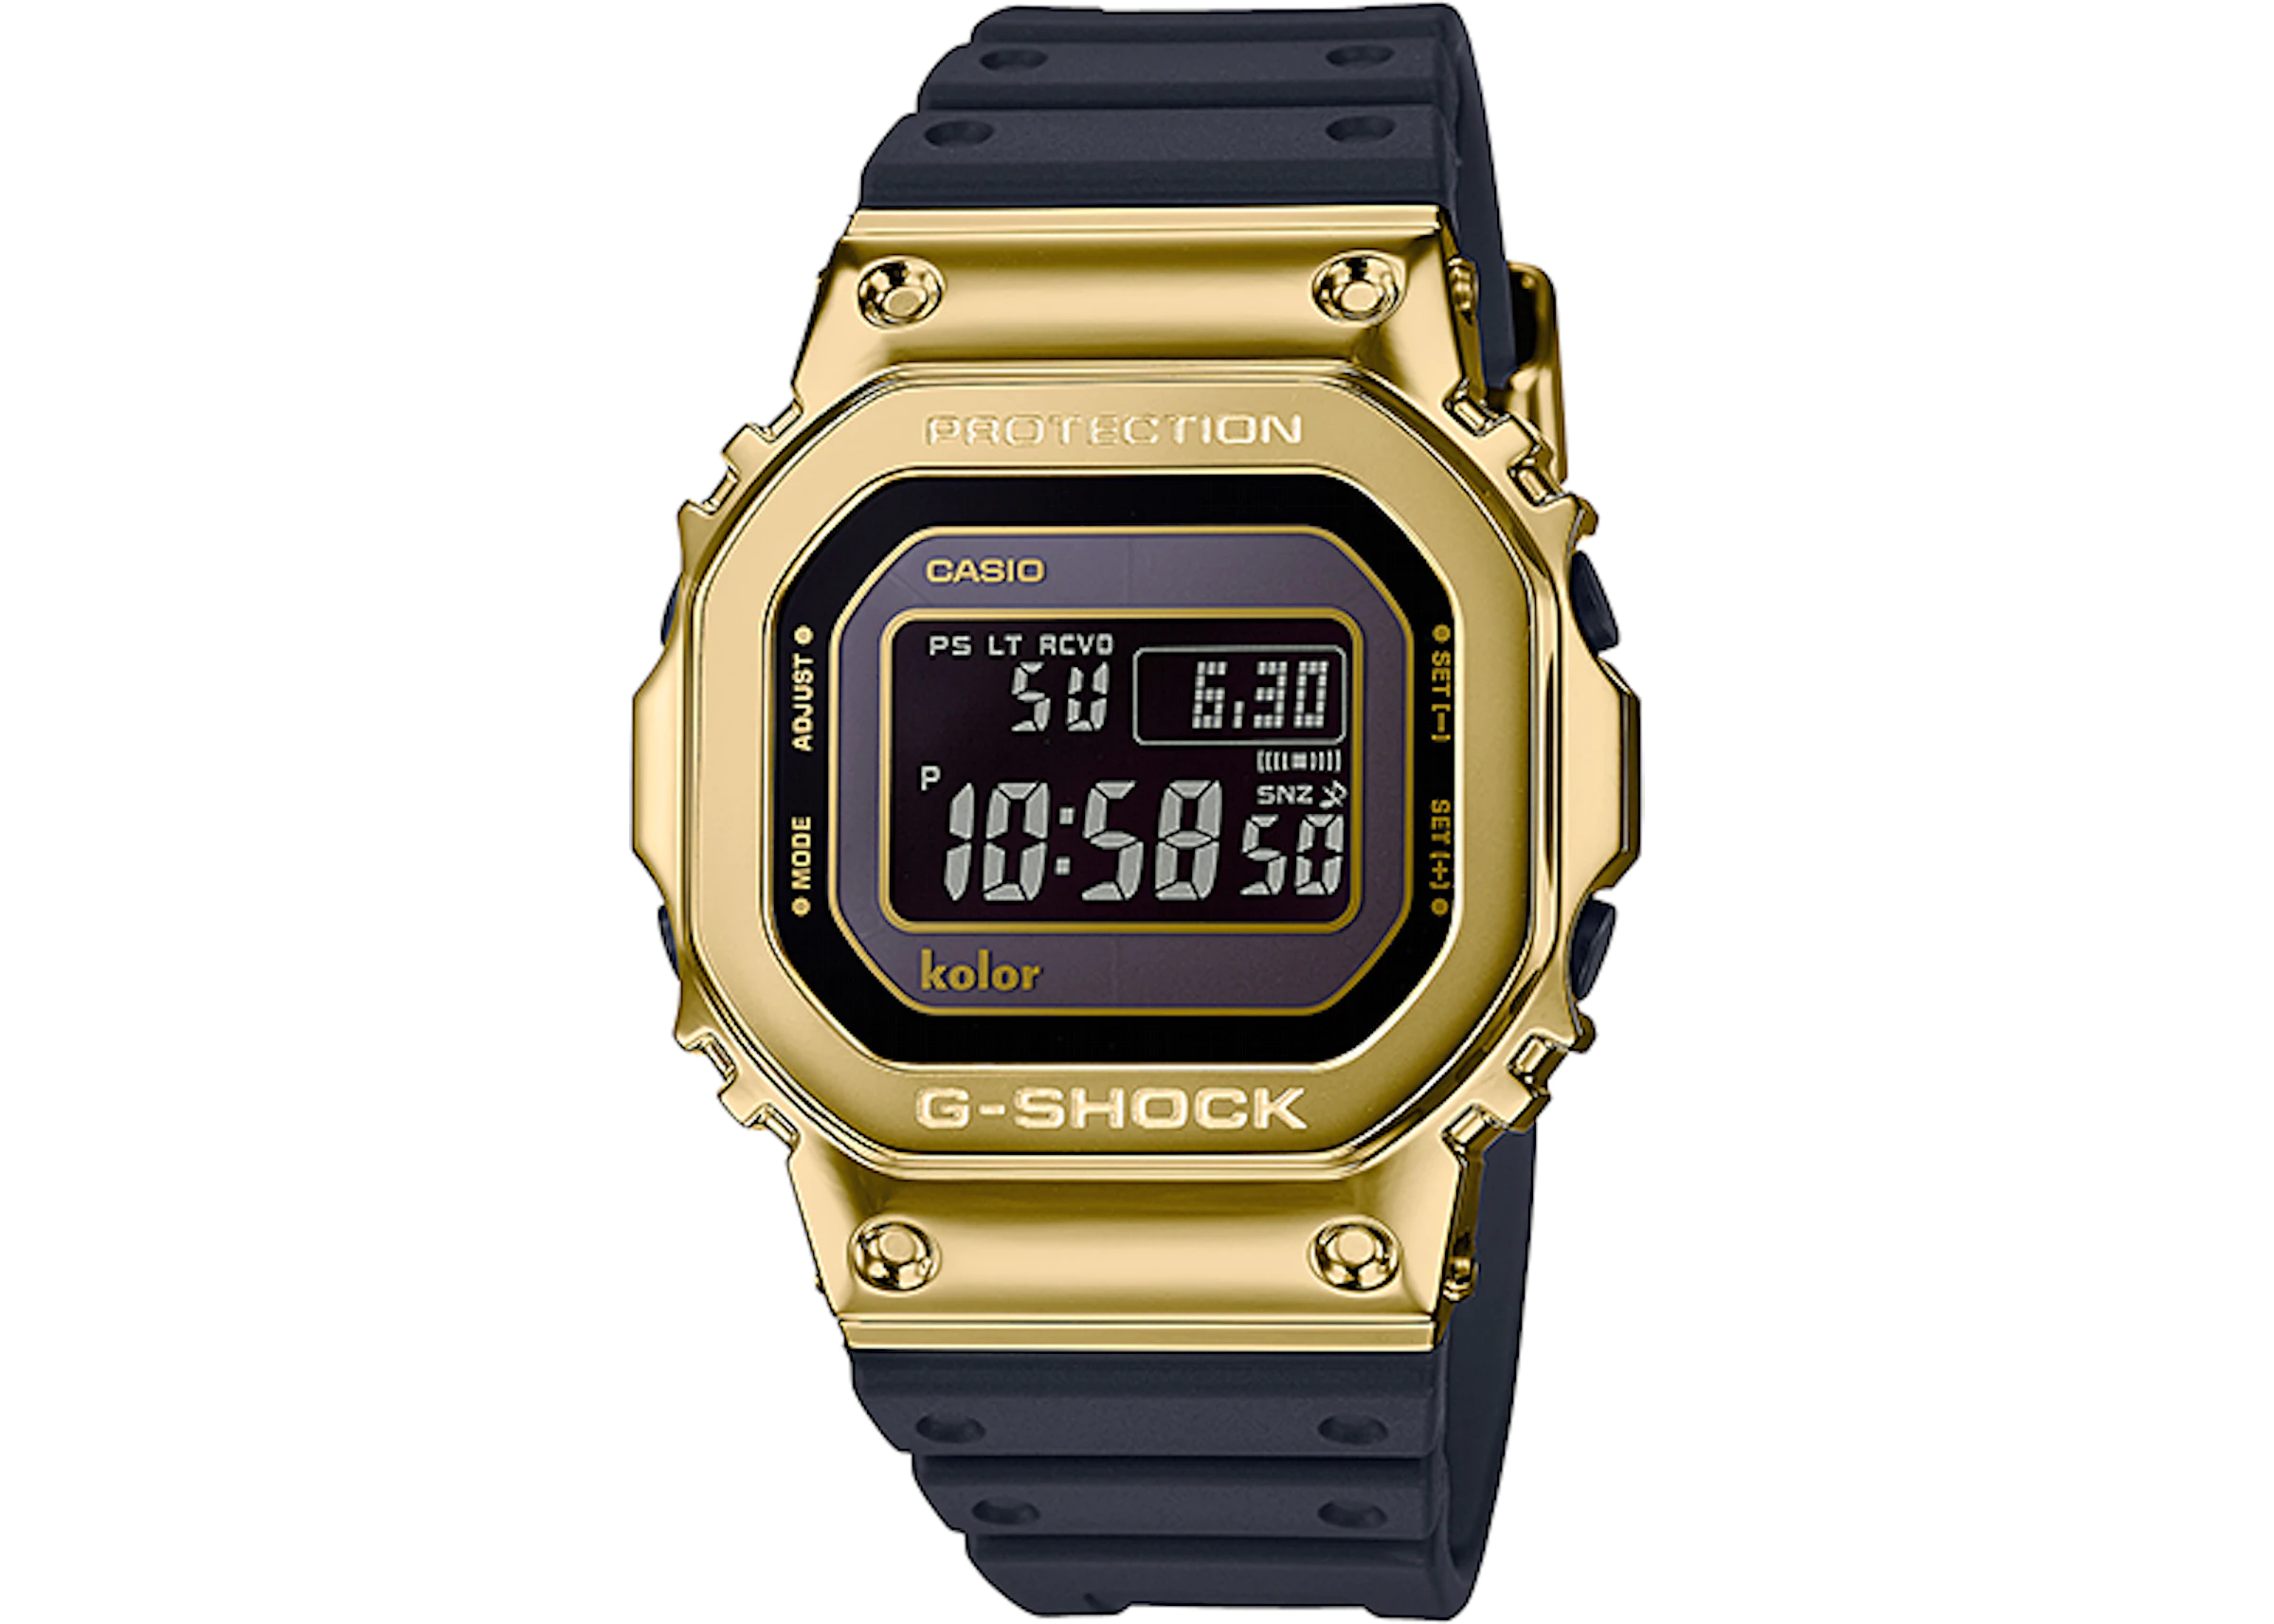 Petición Cambio dueño Casio G-Shock Kolor Limited Edition GMW-B5000KL-9 - 44mm in Gold Plated - ES